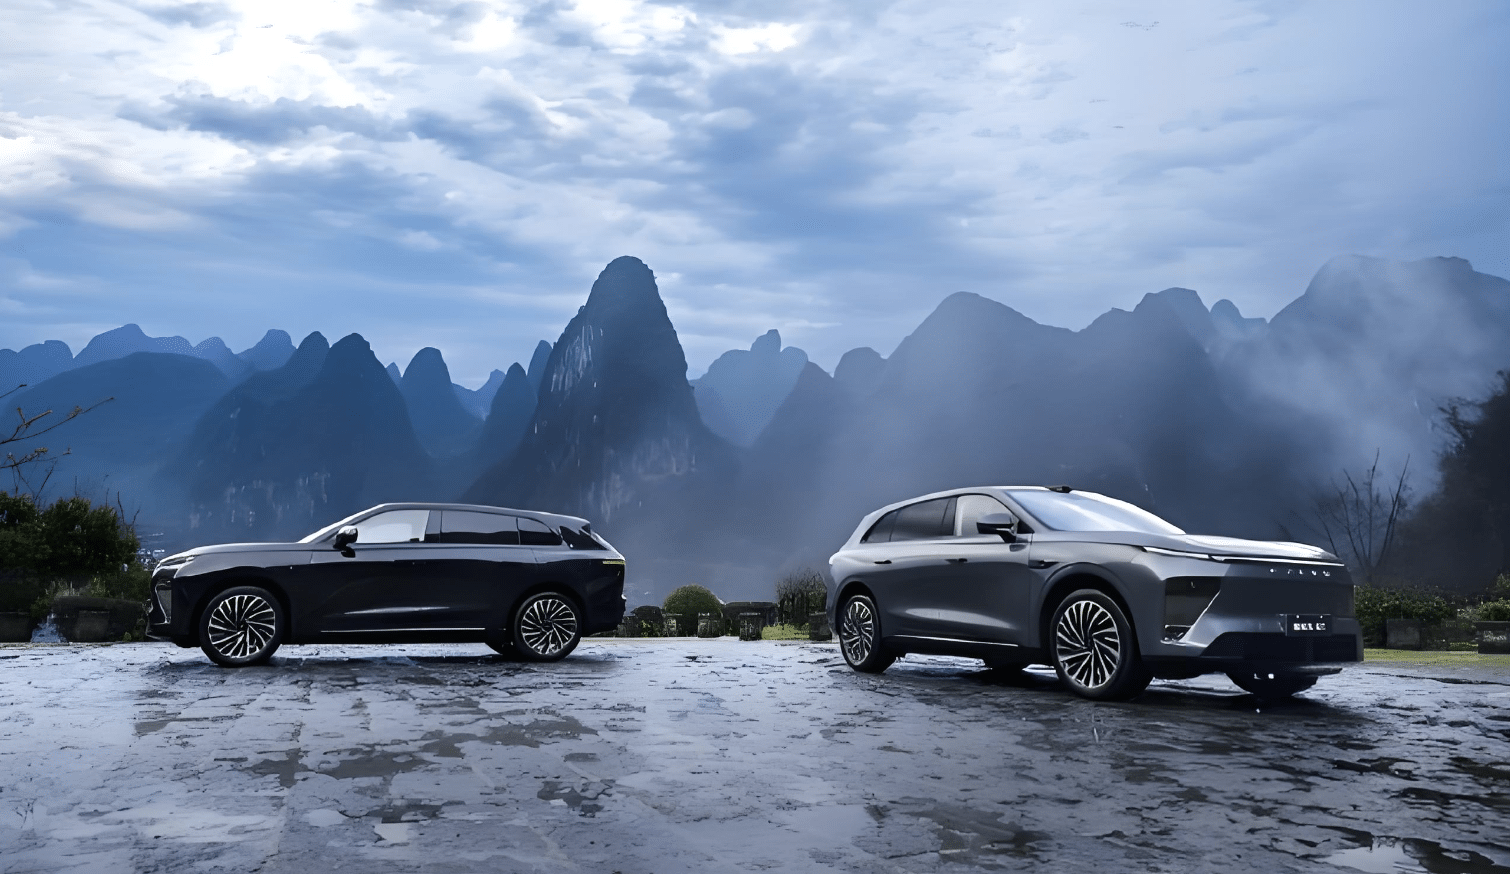 The Exlantix ET: Chery’s latest flagship SUV starting at 27,000 USD